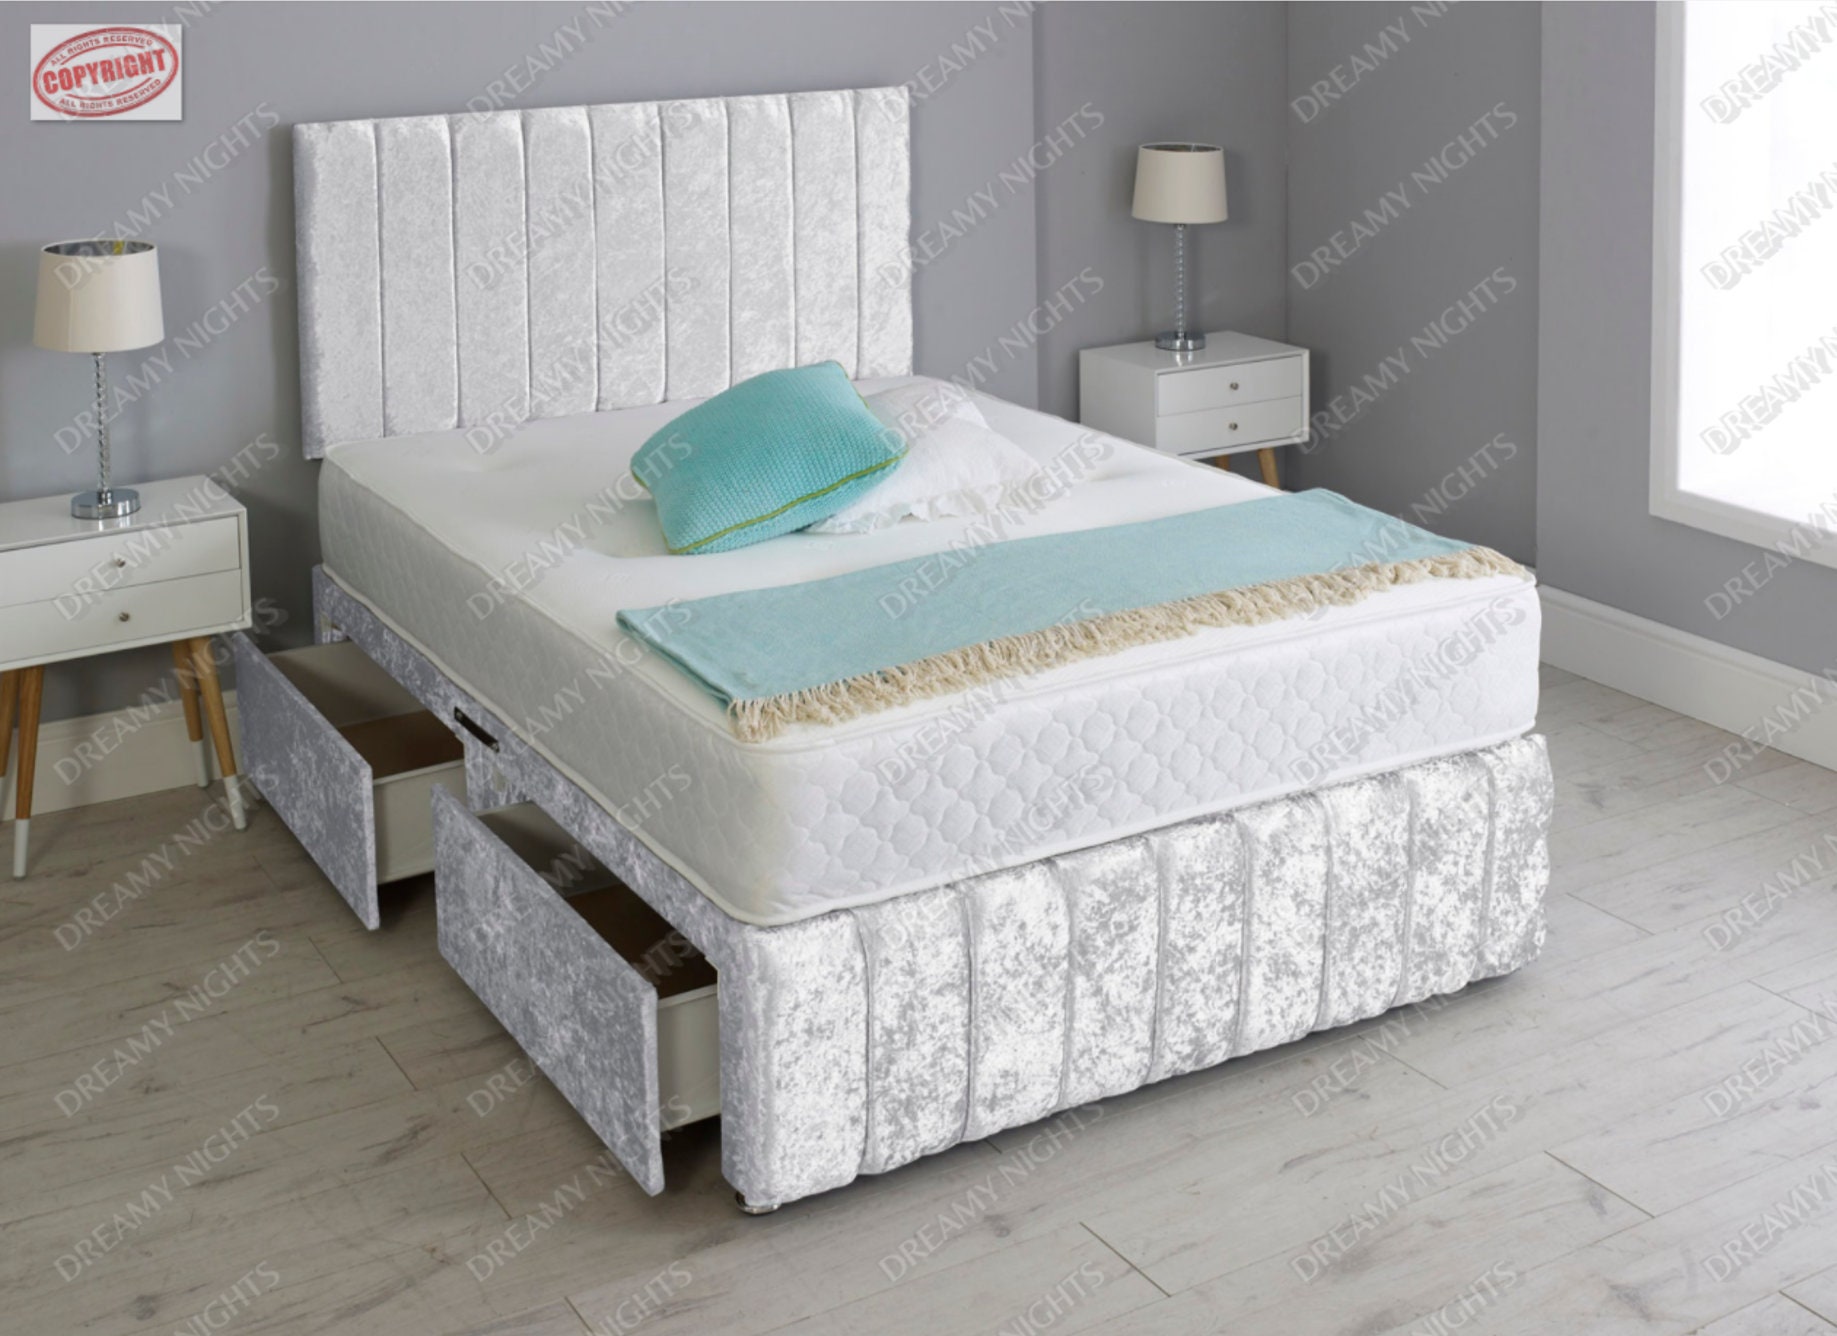 Crushed Velvet Divan Bed Set with Mattress and Free HEADBOARD!!!!! Cream Crush, 4FT6 Double 